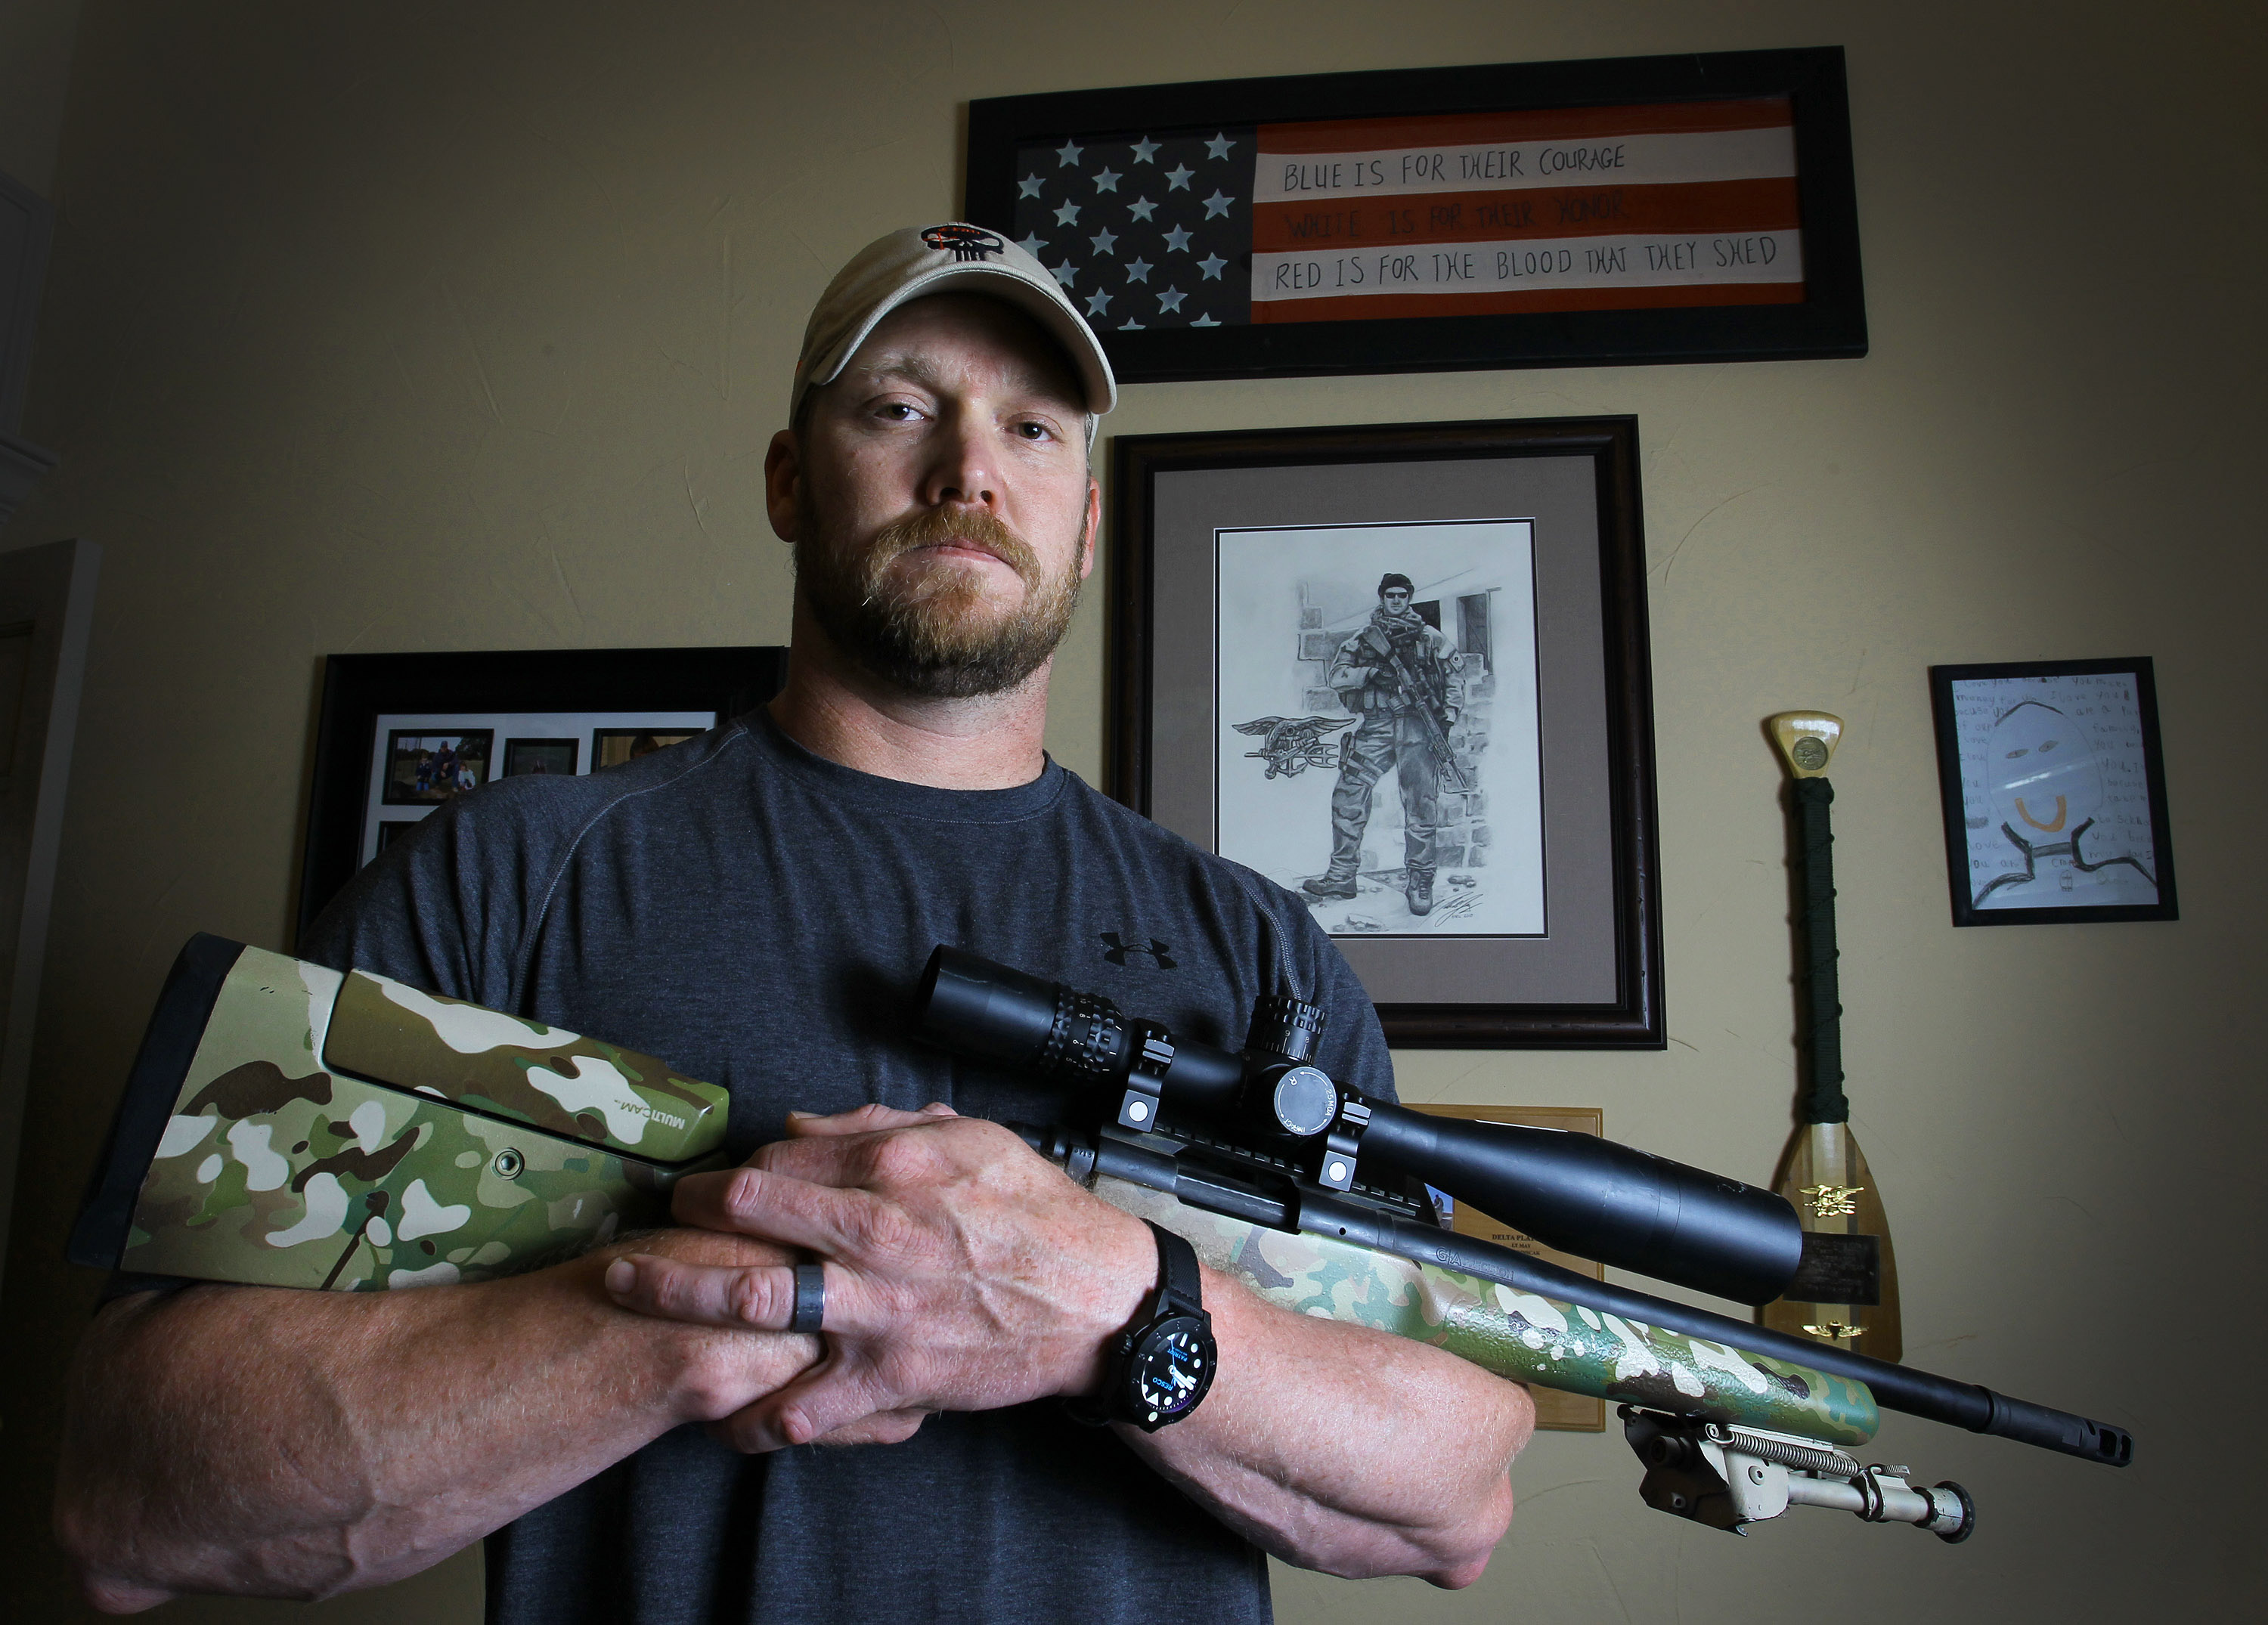 Chris Kyle, a retired Navy SEAL and bestselling author of the book "American Sniper: The Autobiography of the Most Lethal Sniper in U.S. Military History", holds a .308 sniper rifle in this April 6, 2012, photo. (Paul Moseley—Fort Worth Star-Telegram/ Getty Images)